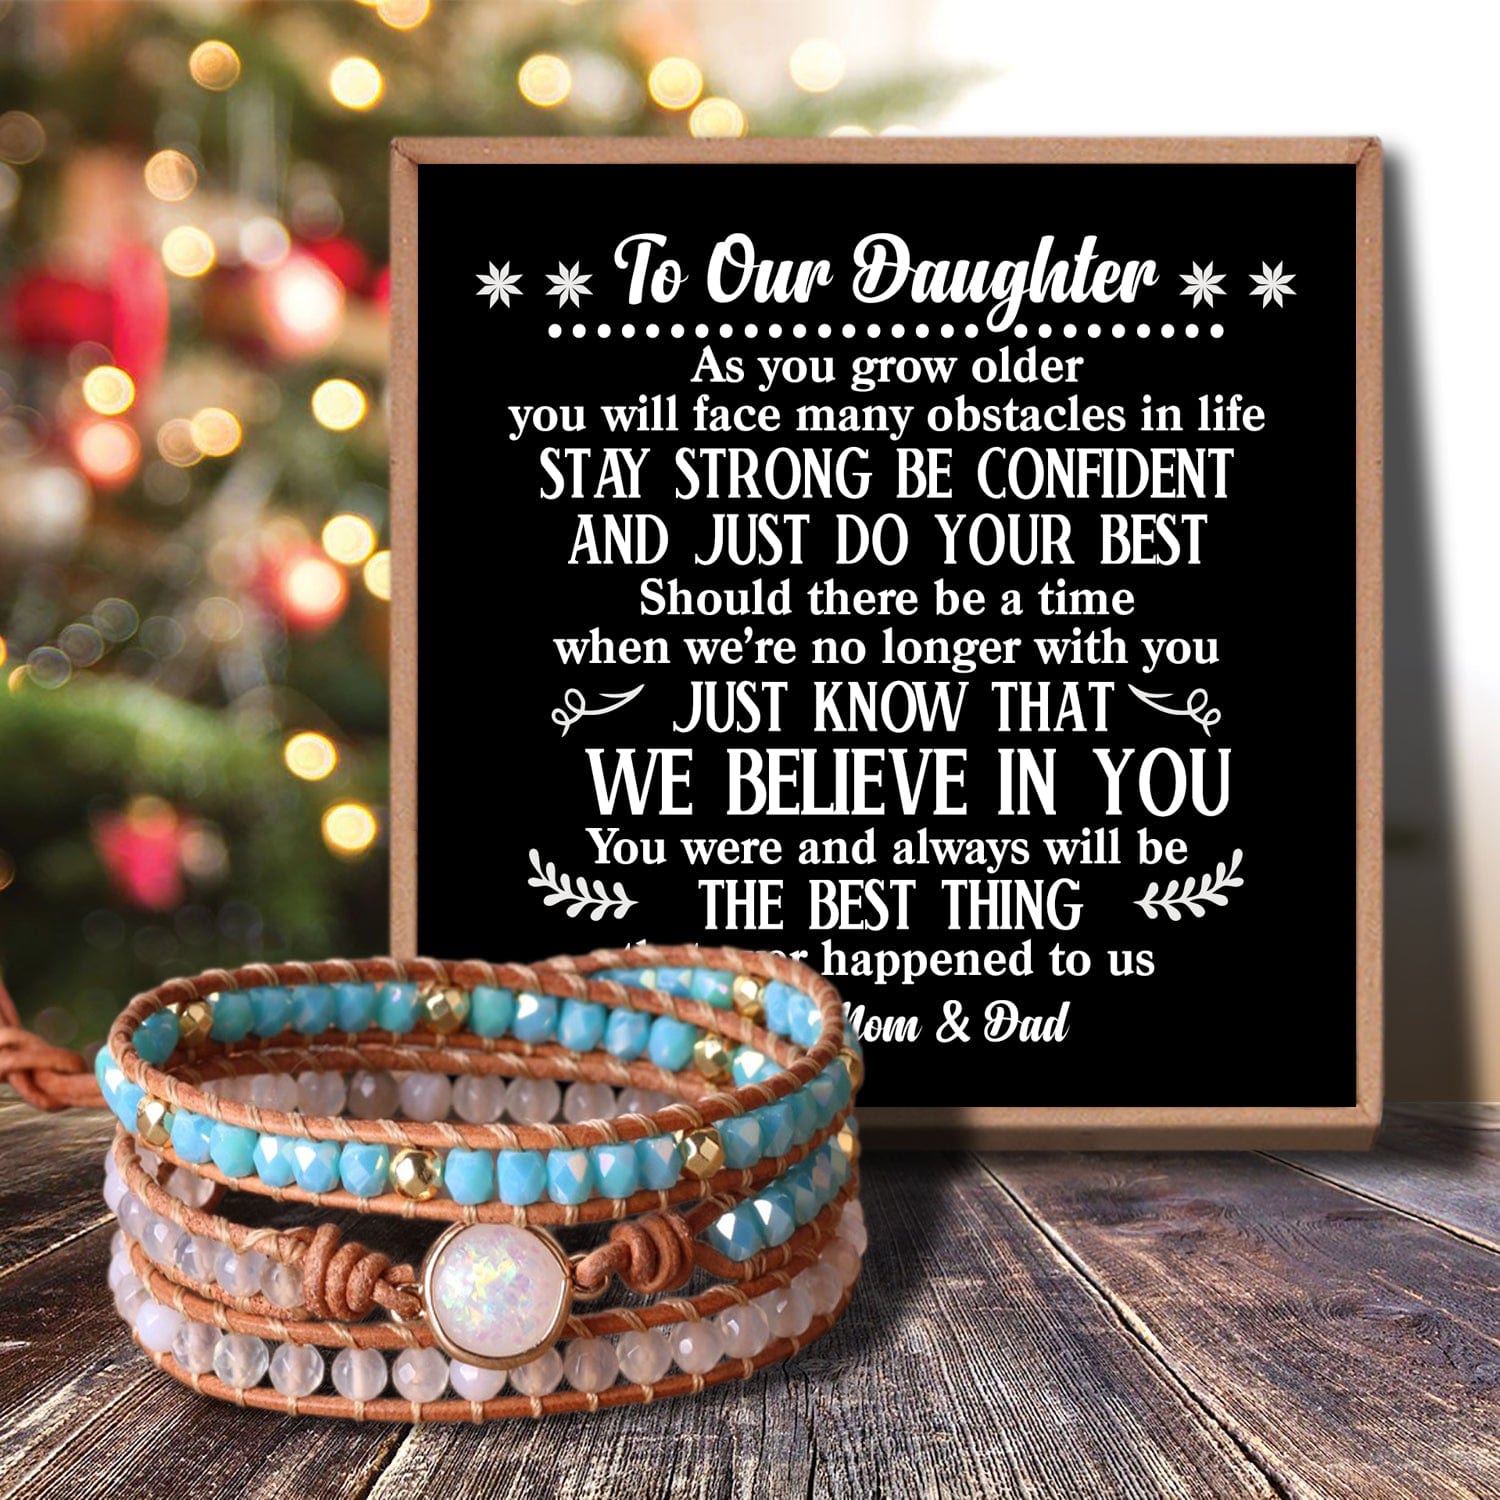 Bracelets For Daughter To Our Daughter - We Believe In You Crystal Beaded Bracelet GiveMe-Gifts